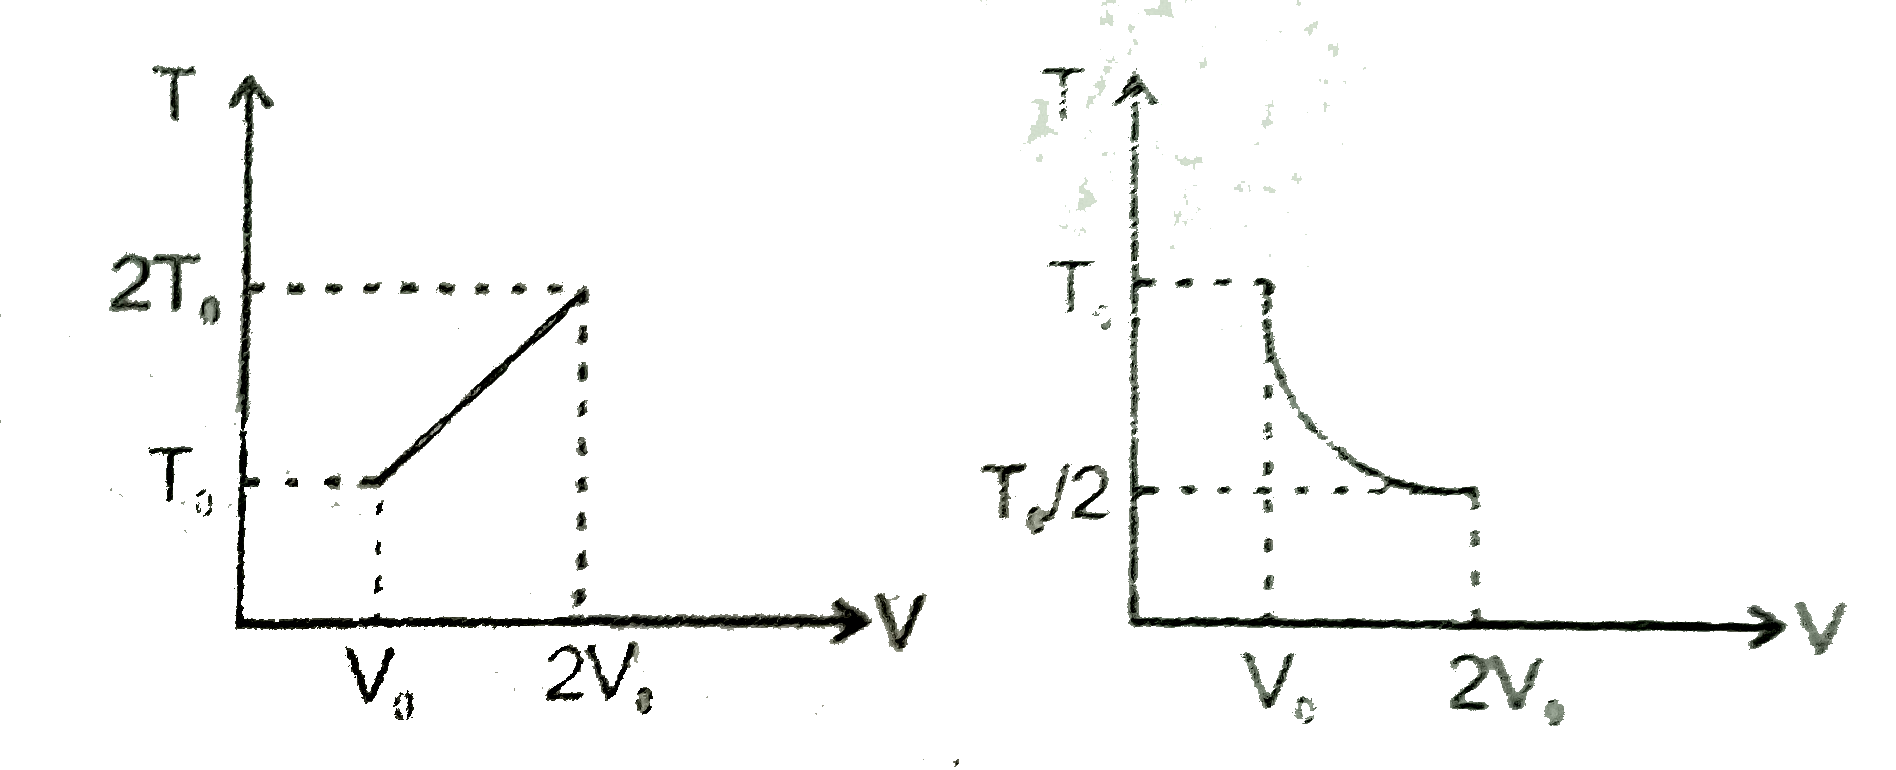 For two thermodynamic process temperature and volume diagram are given. In first process, it is a straight line having initial and final coordinates as (V(0),T(0)) and (2V(0), 2T(0)), where as in second process it is a rectangular hyperbola having initial and final coordinates (V(0),T(0)) and (2V(0), T(0)//2). Then ratio of work done in the two process must be